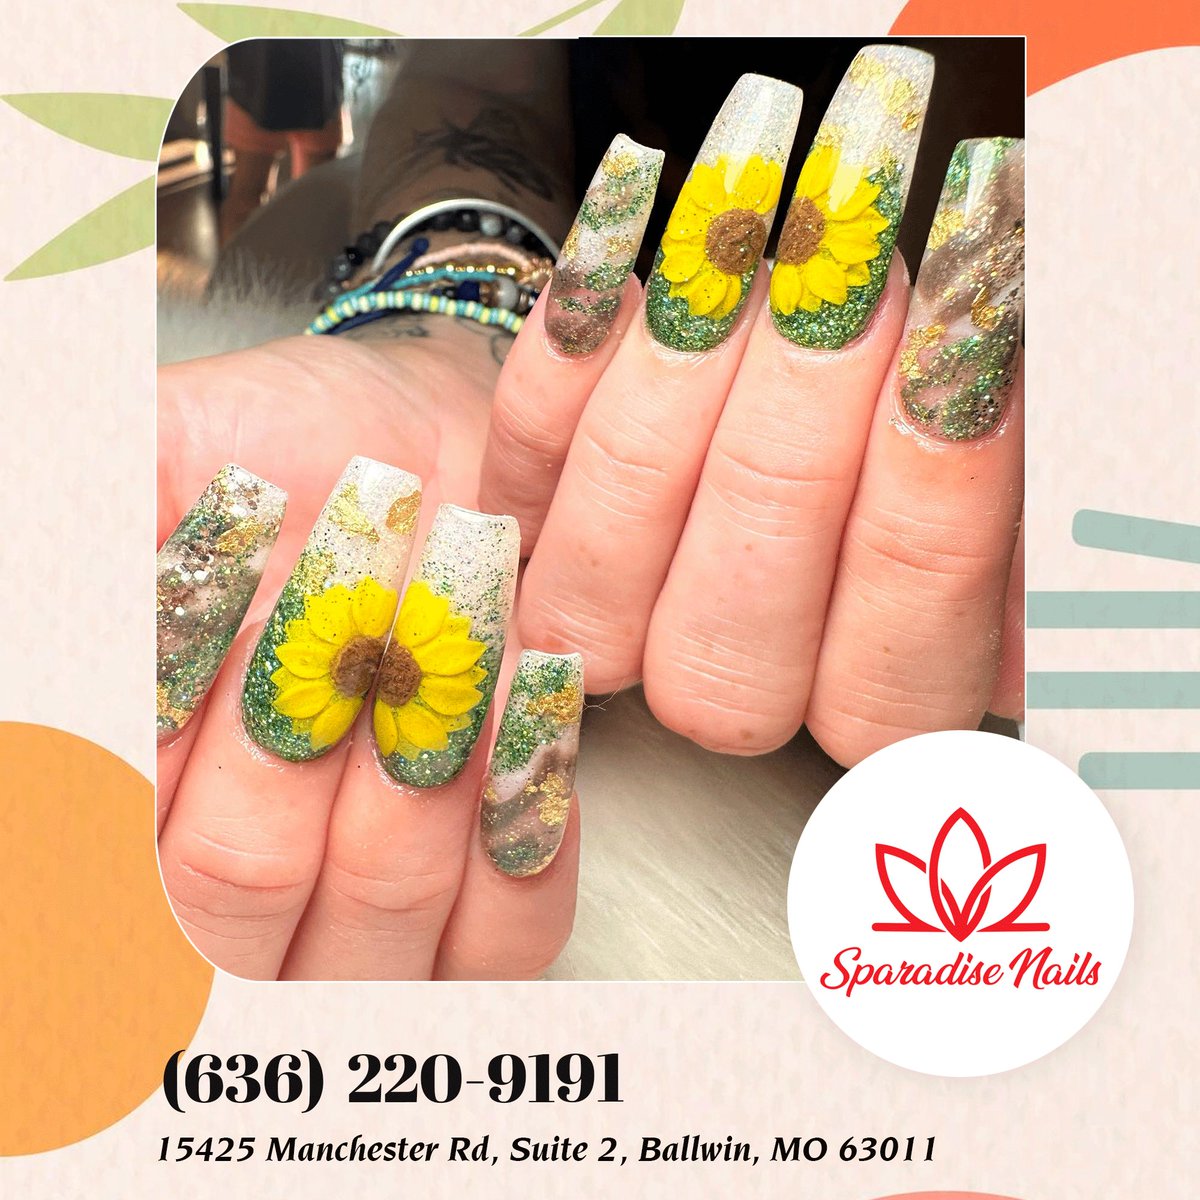 Sunshine on your fingertips! These bright and cheerful sunflower nails are perfect for any season.🌻✨
*Booking Online: lk.macmarketing.us/SparadiseNails…

#sparadisenails #nailsalon #nails #nailart #nailsalonballwin #naildesign #spa